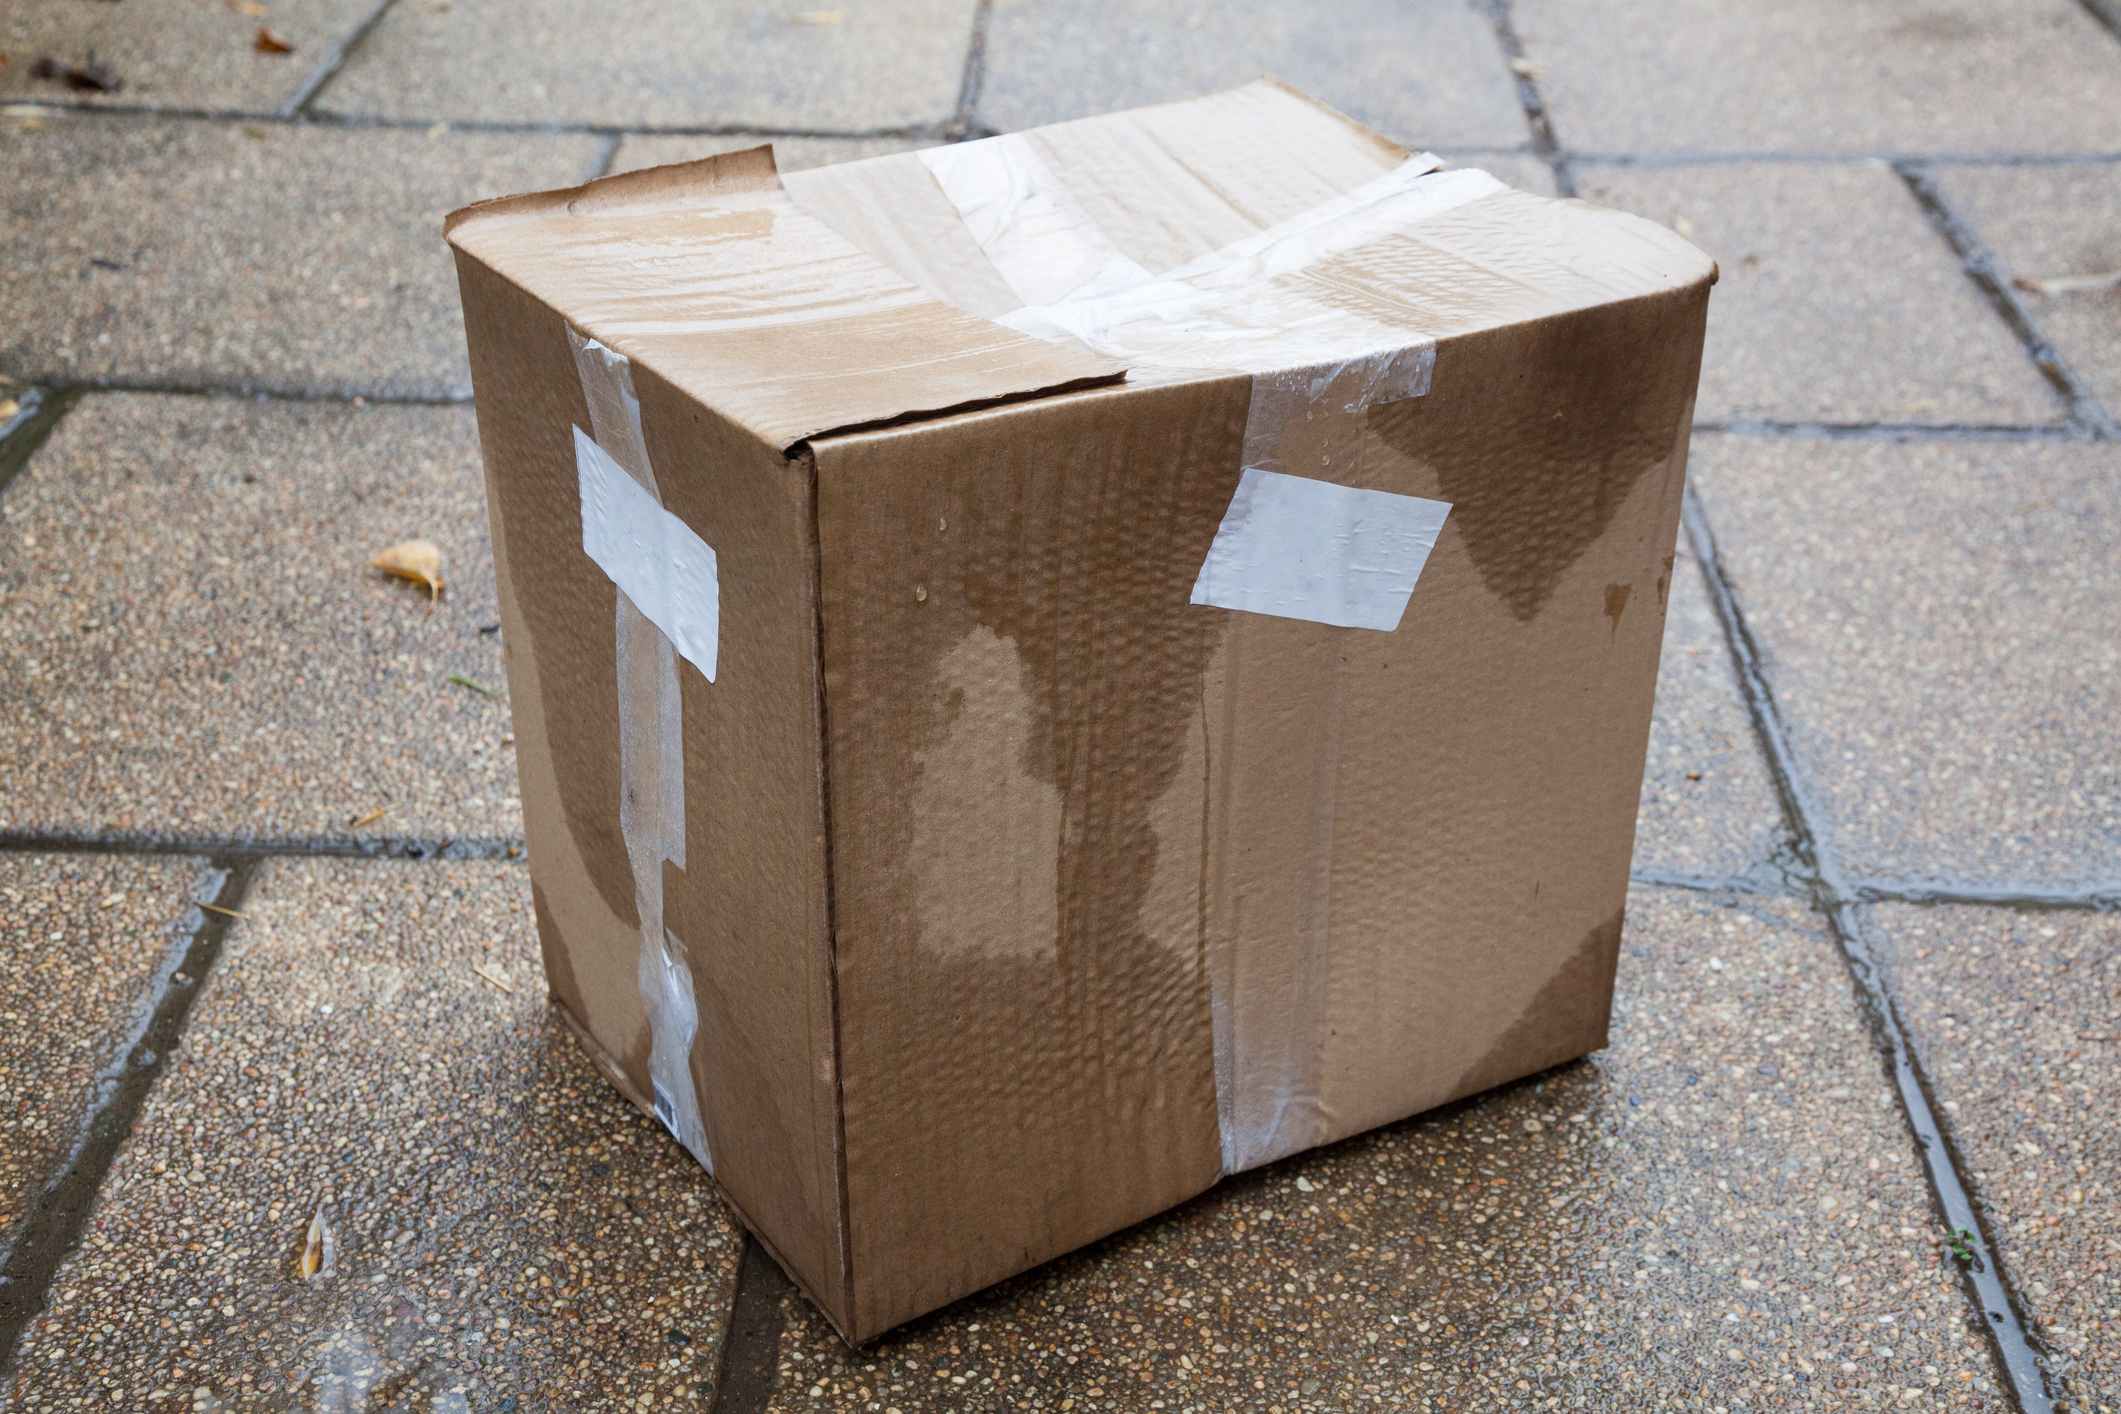 wet cardboard box on the ground - moving in the rain